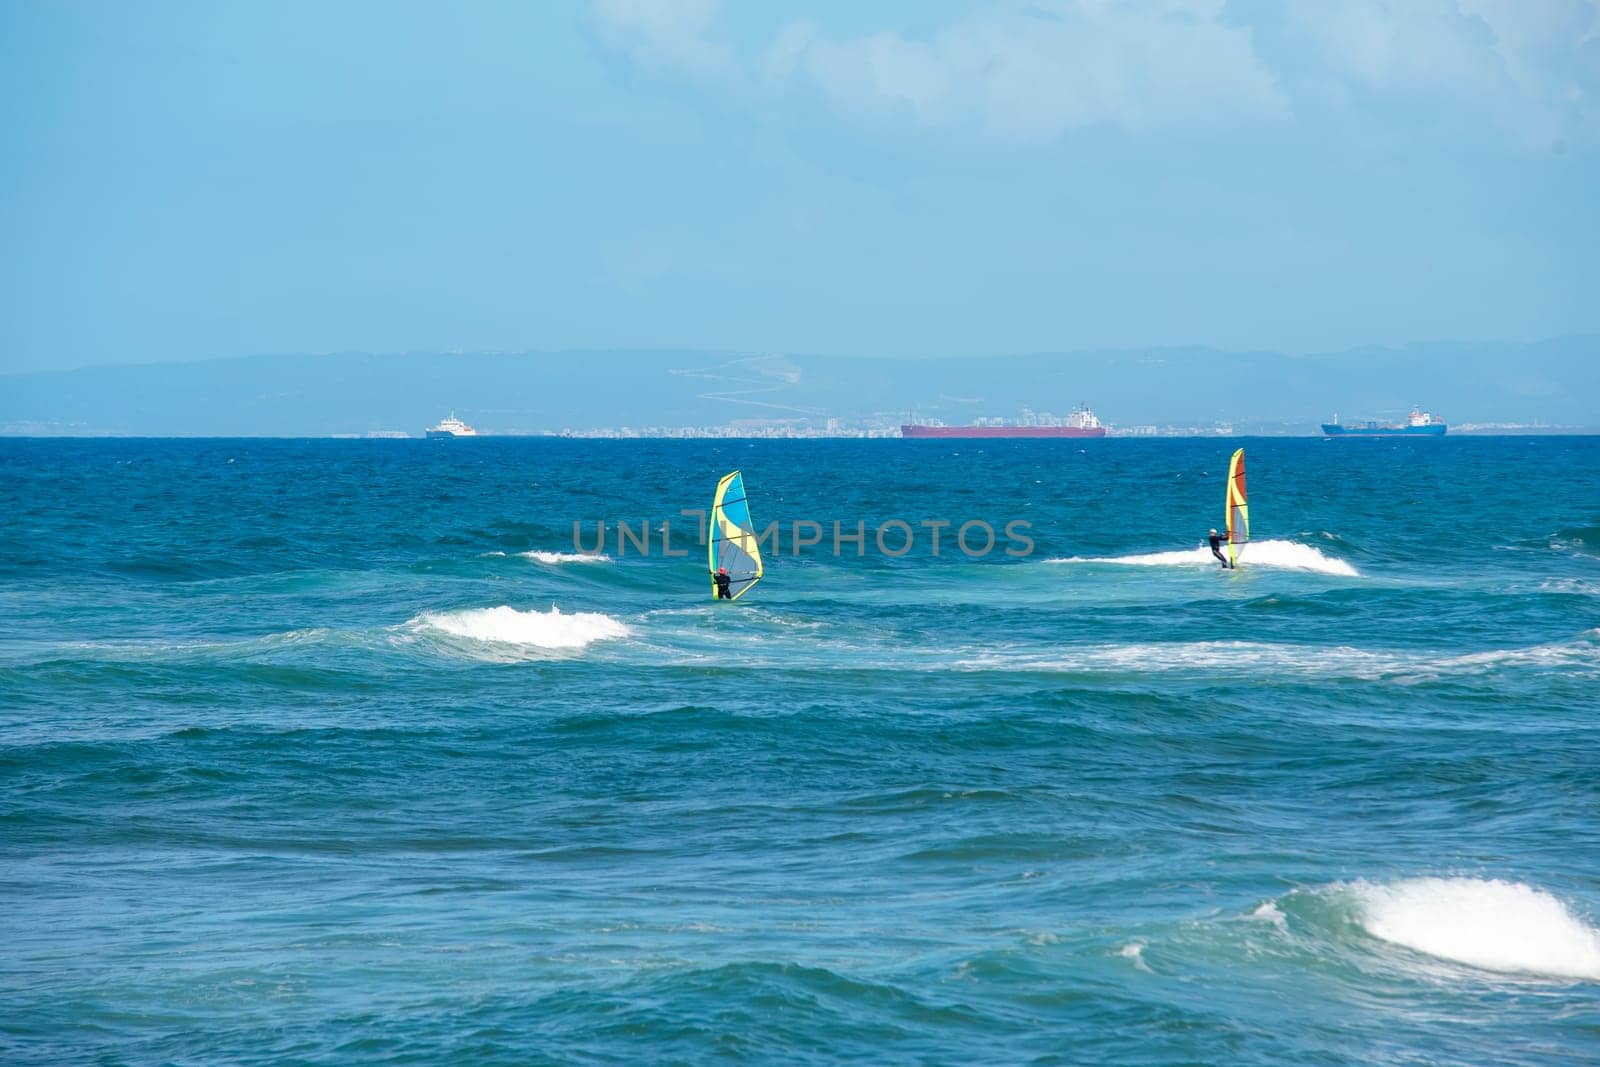 Enjoying extreme windsurfing and ocean waves on a hot sunny day. water sports concept